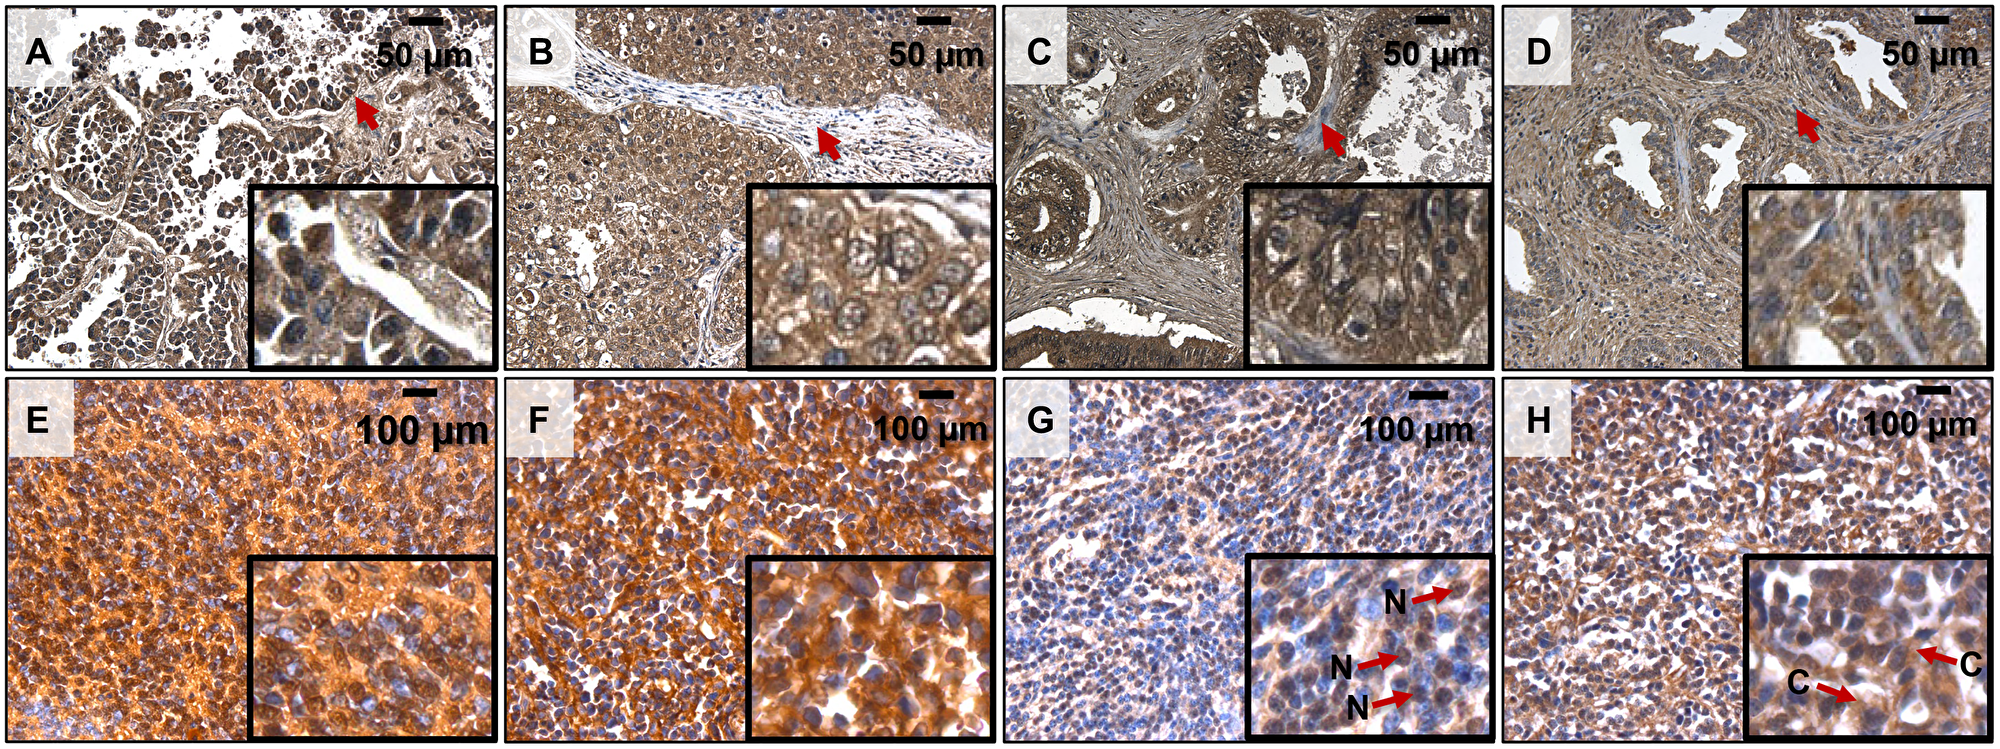 PolyP detection by immunohistochemistry in human cancer samples.